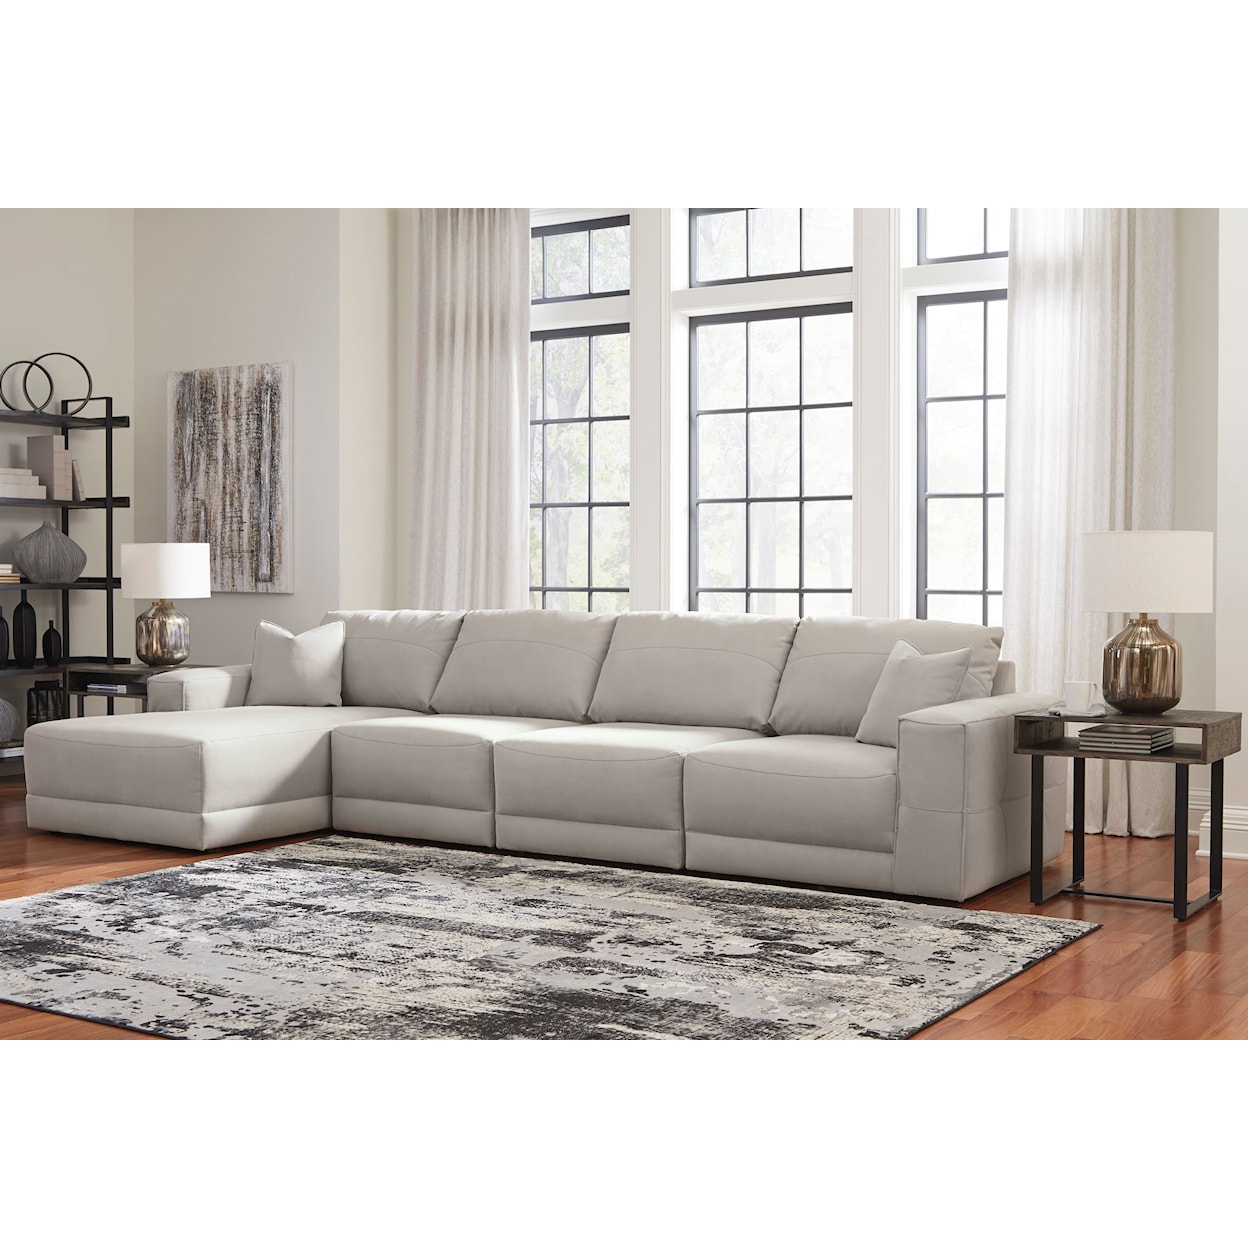 Ashley Furniture Benchcraft Next-Gen Gaucho 4-Piece Sectional Sofa with Chaise